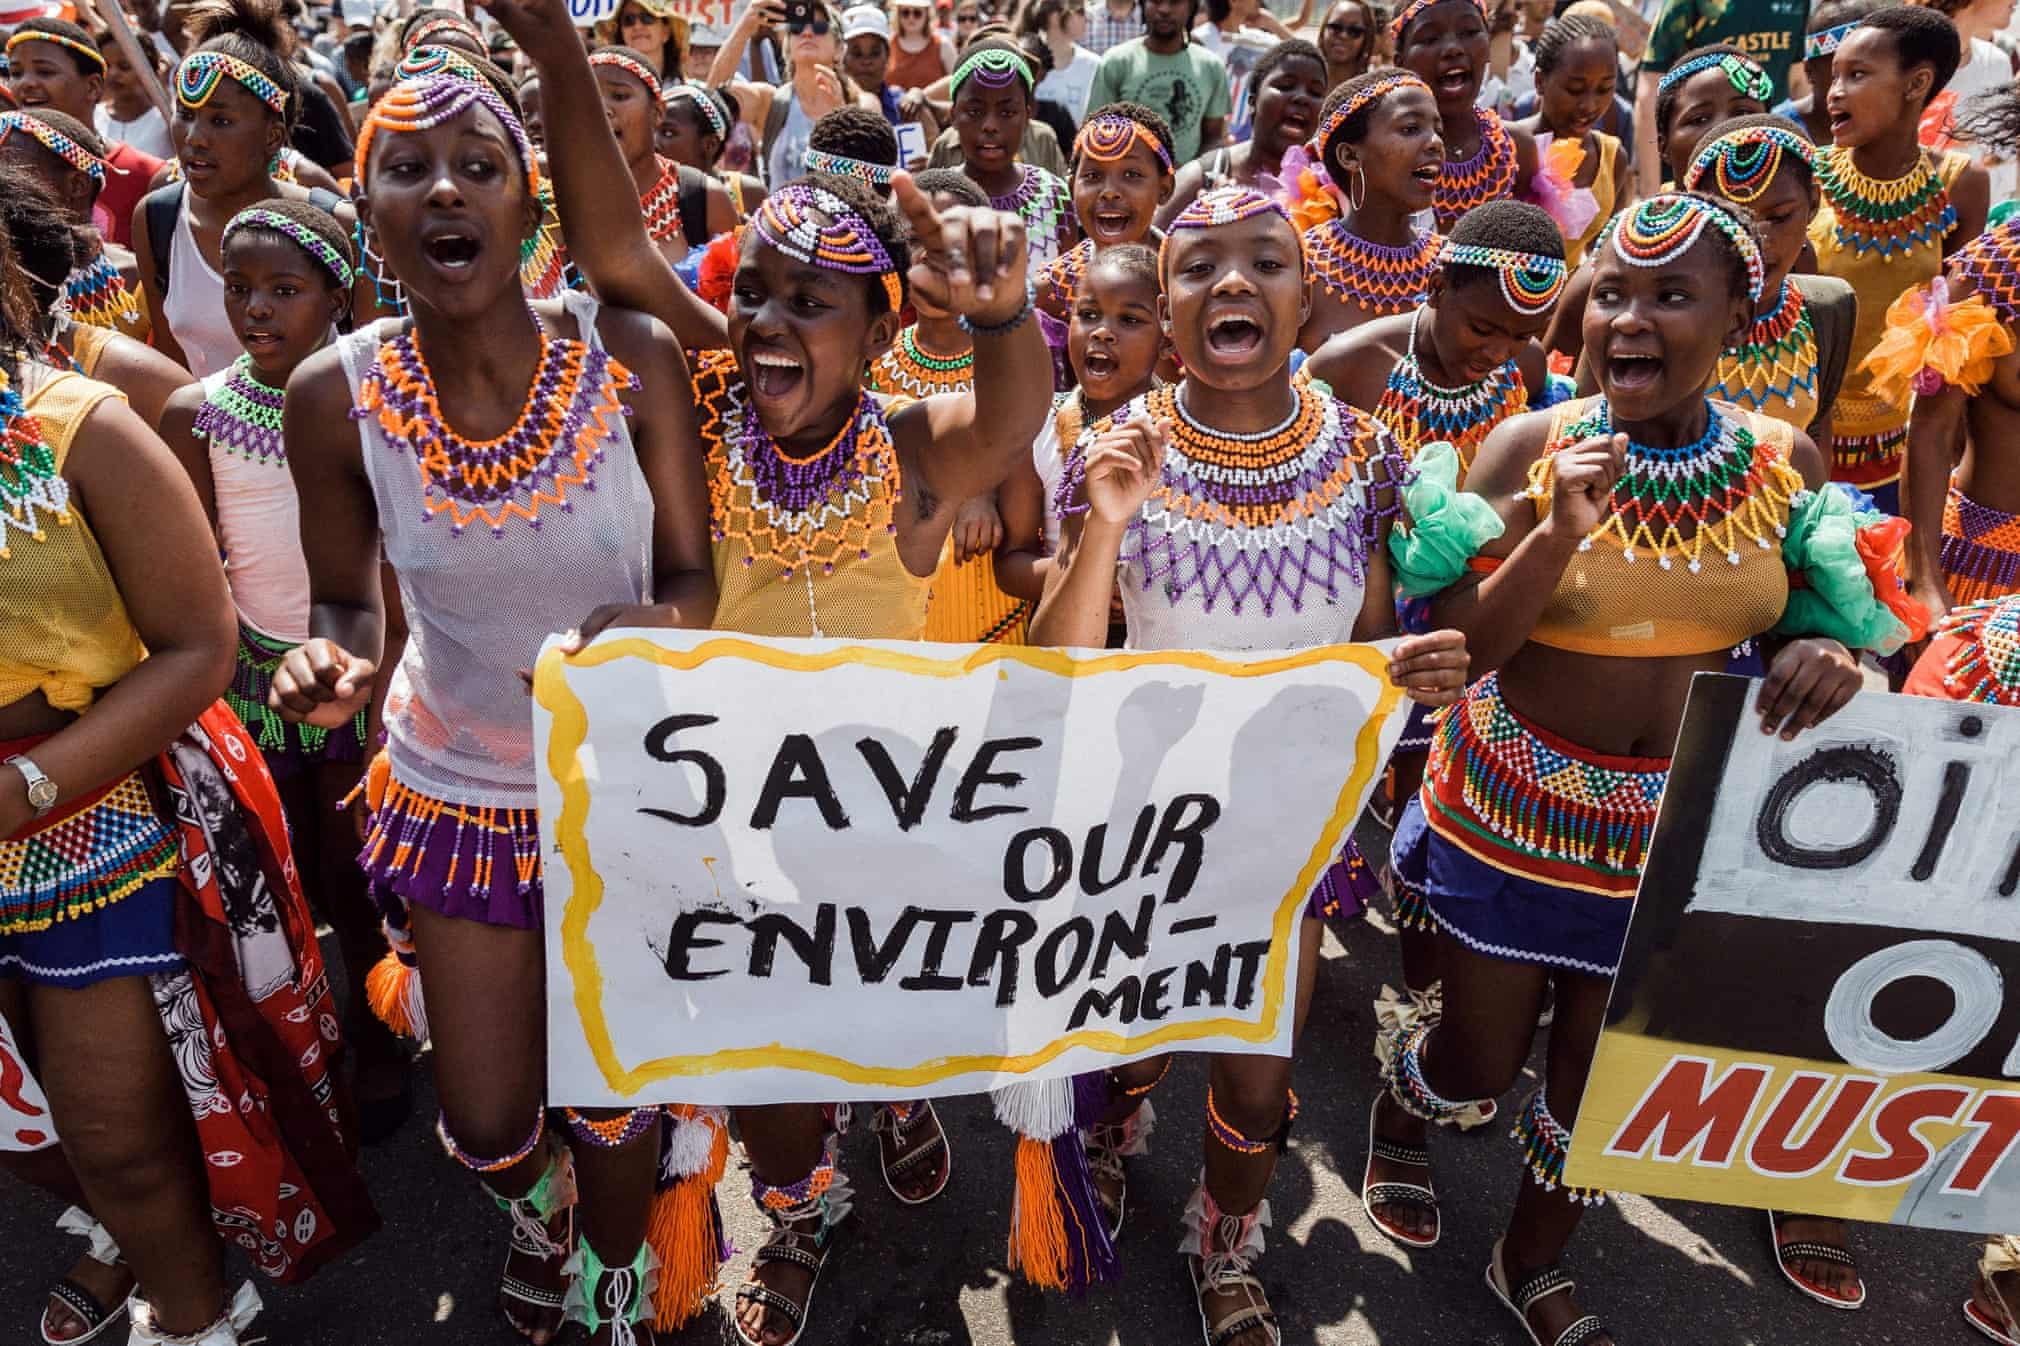 Girls in Durban South Africa march in the Global Climate Strike, 20 September 2019. Photo: Rajesh Jantilal / AFP / Getty Images